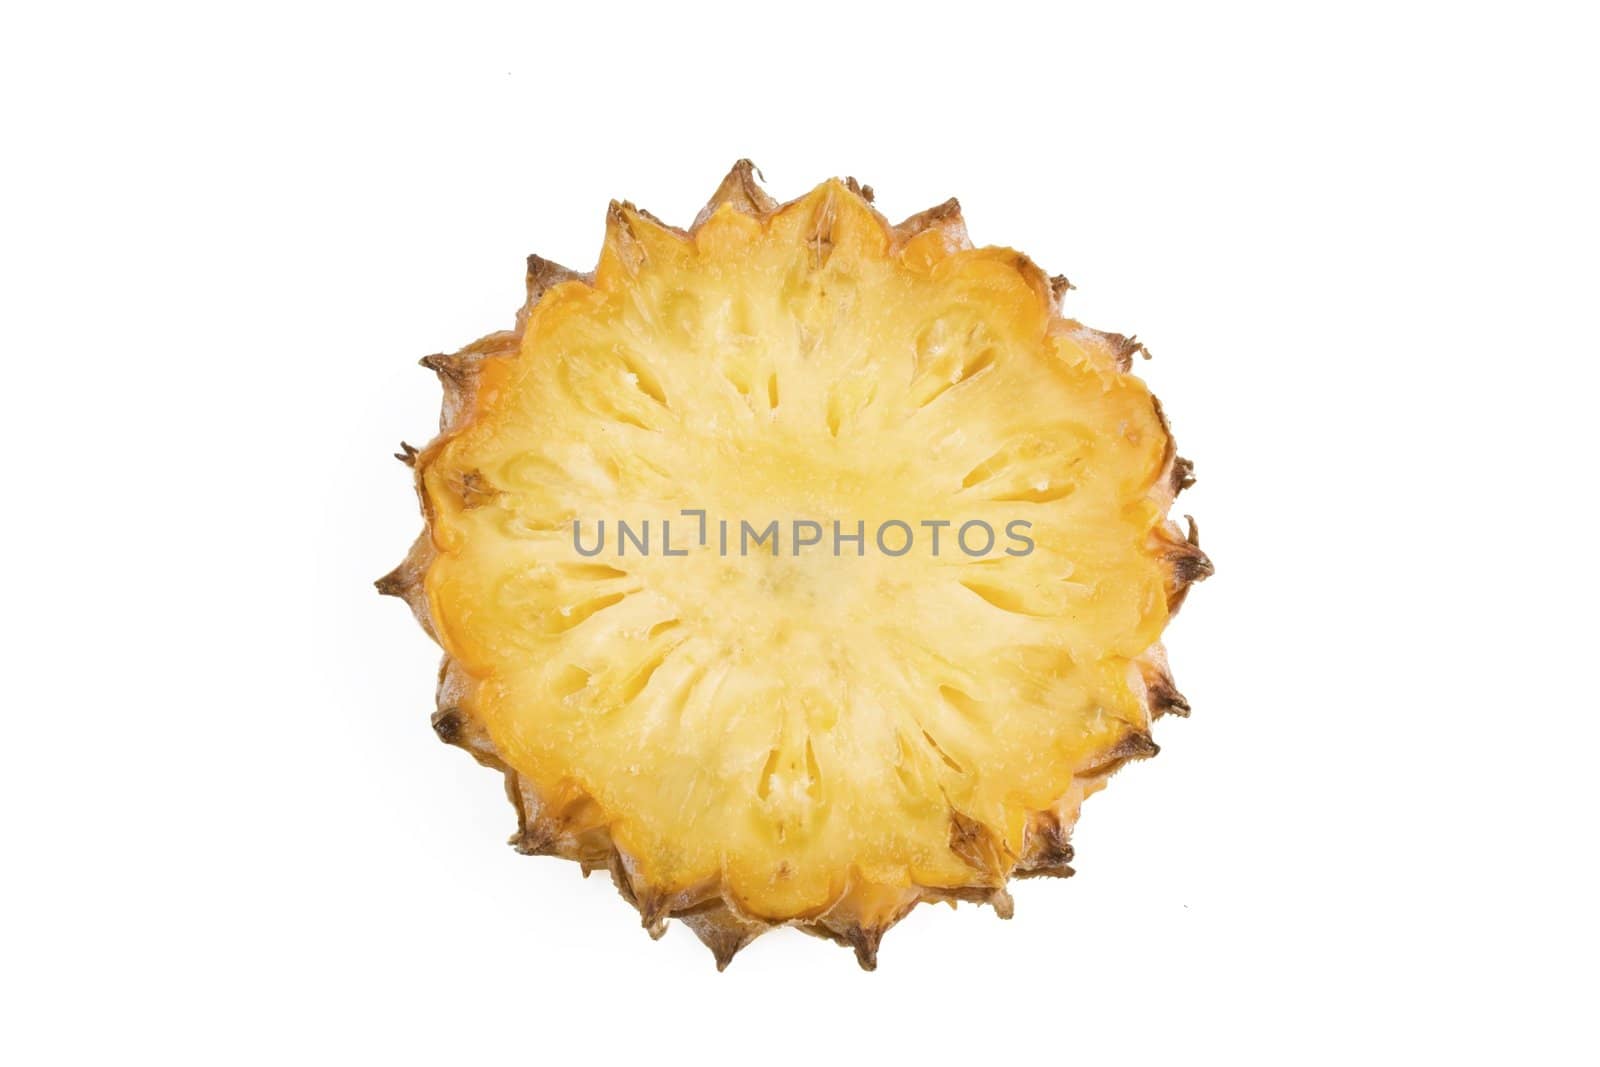 Slice of Pineapple with rind on white background.